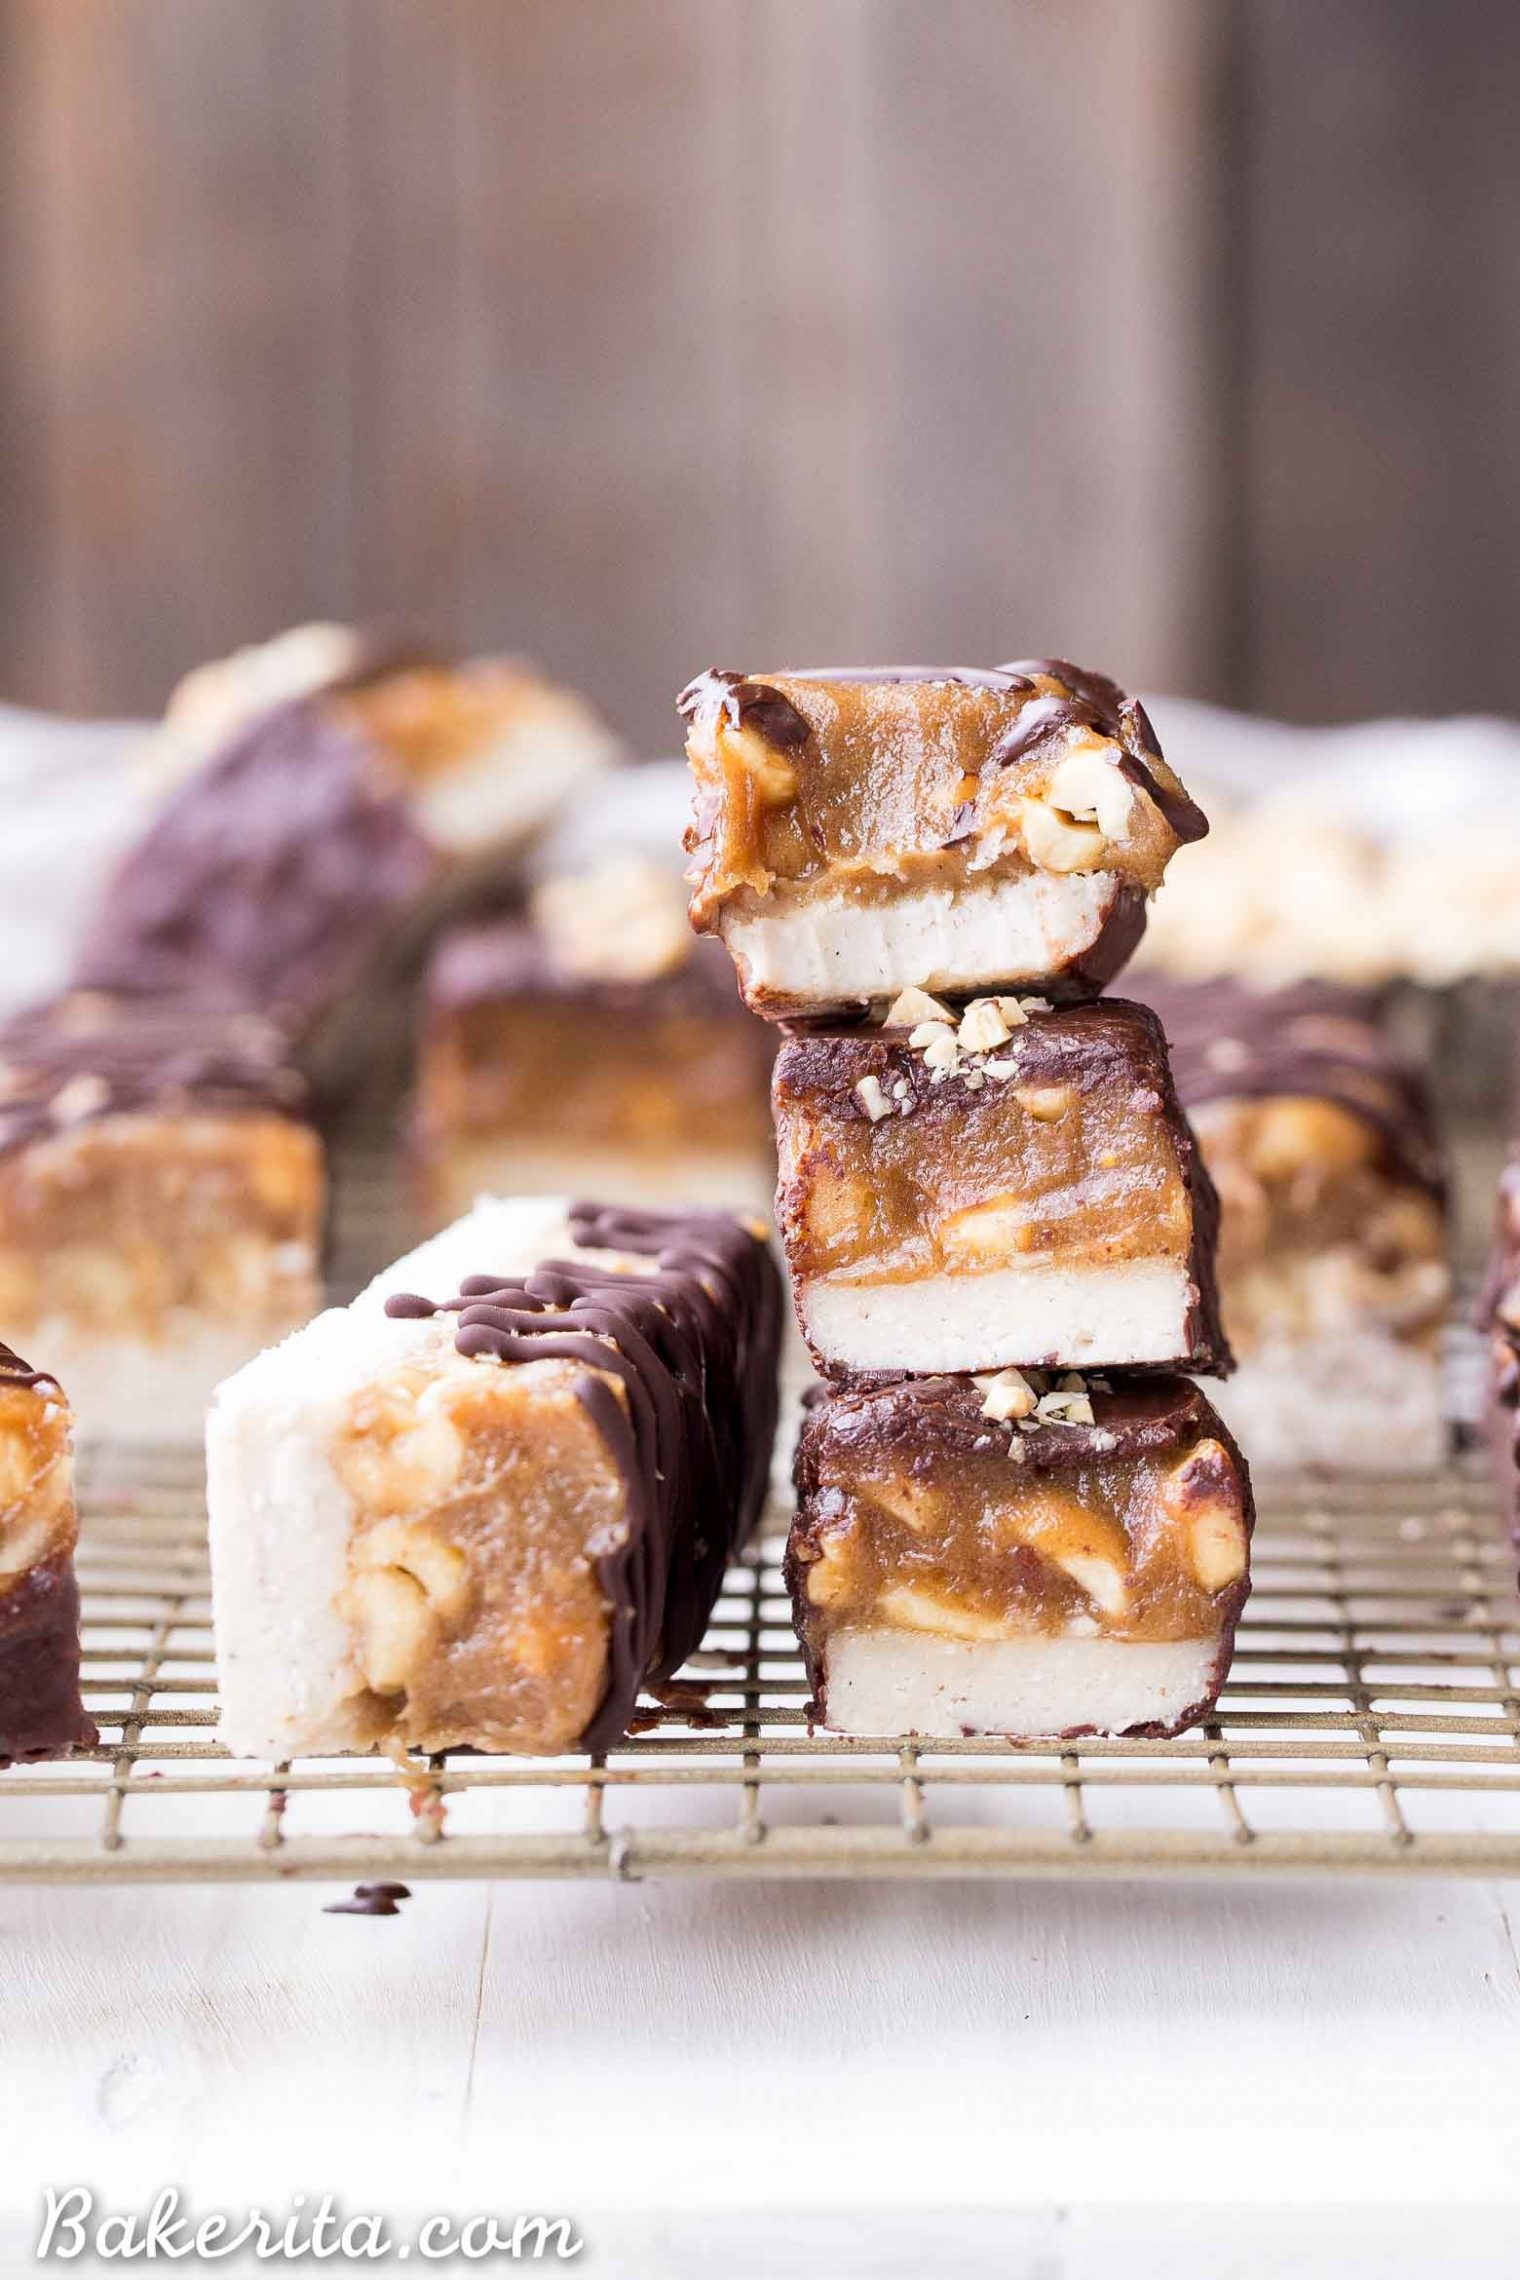 These Homemade Snickers Bars are a healthier version of the classic candy with no baking required! These gluten-free and vegan candy bars have a layer of raw nougat, topped with a peanut date caramel, all dunked in homemade chocolate.